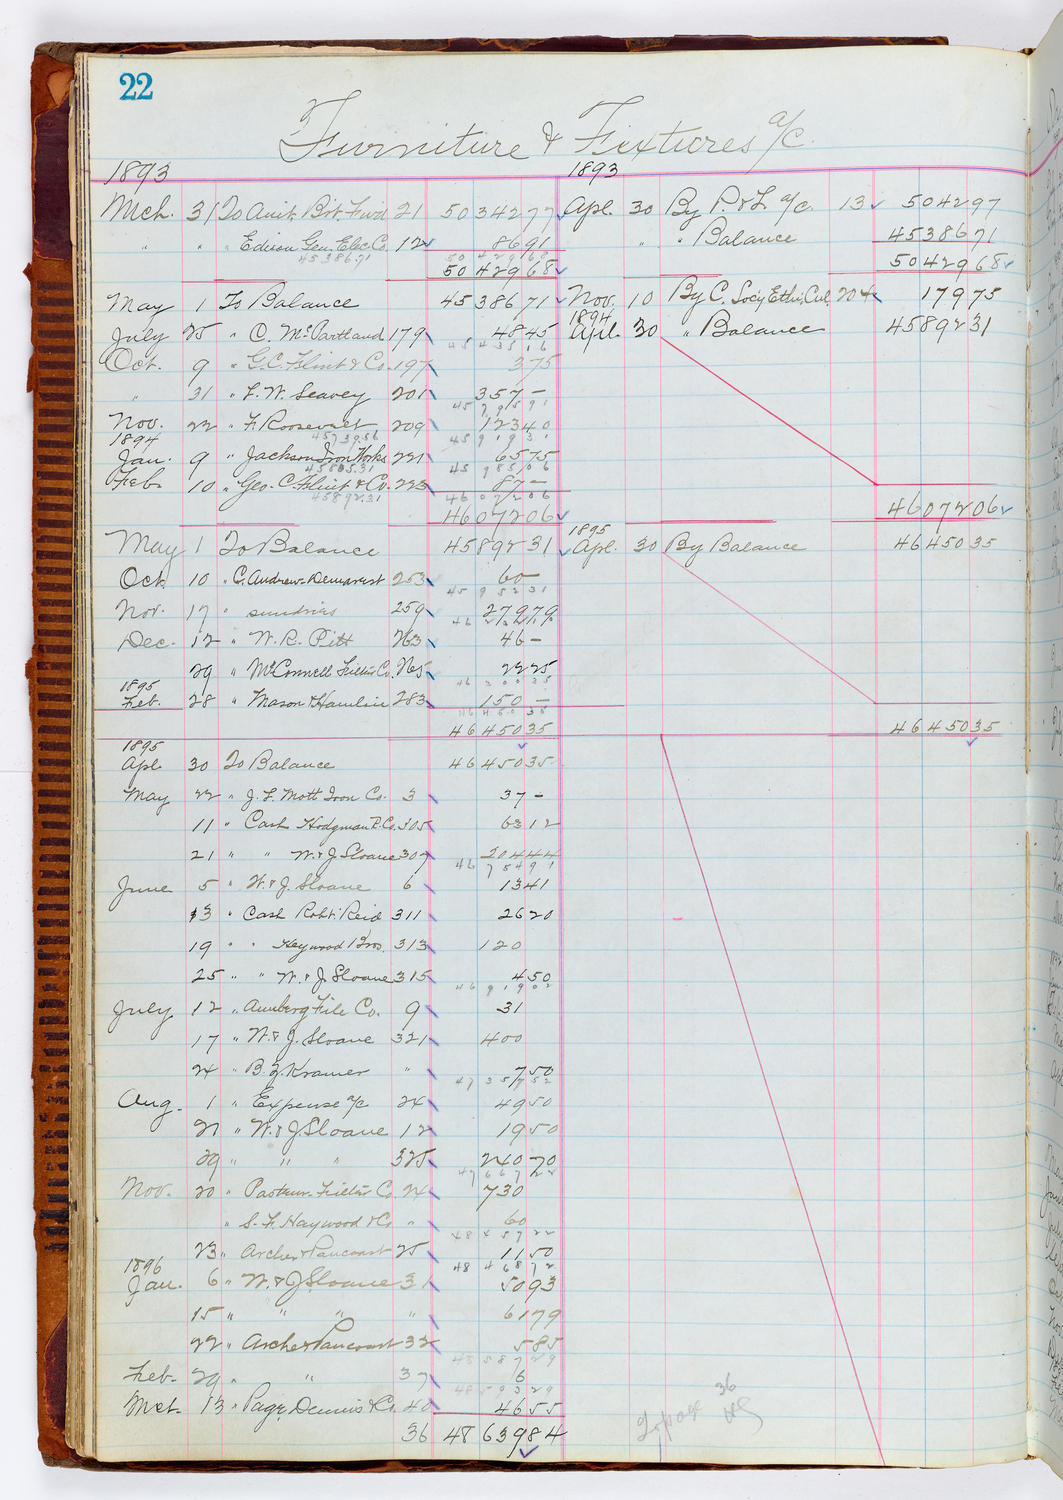 Music Hall Accounting Ledger, volume 1, page 22